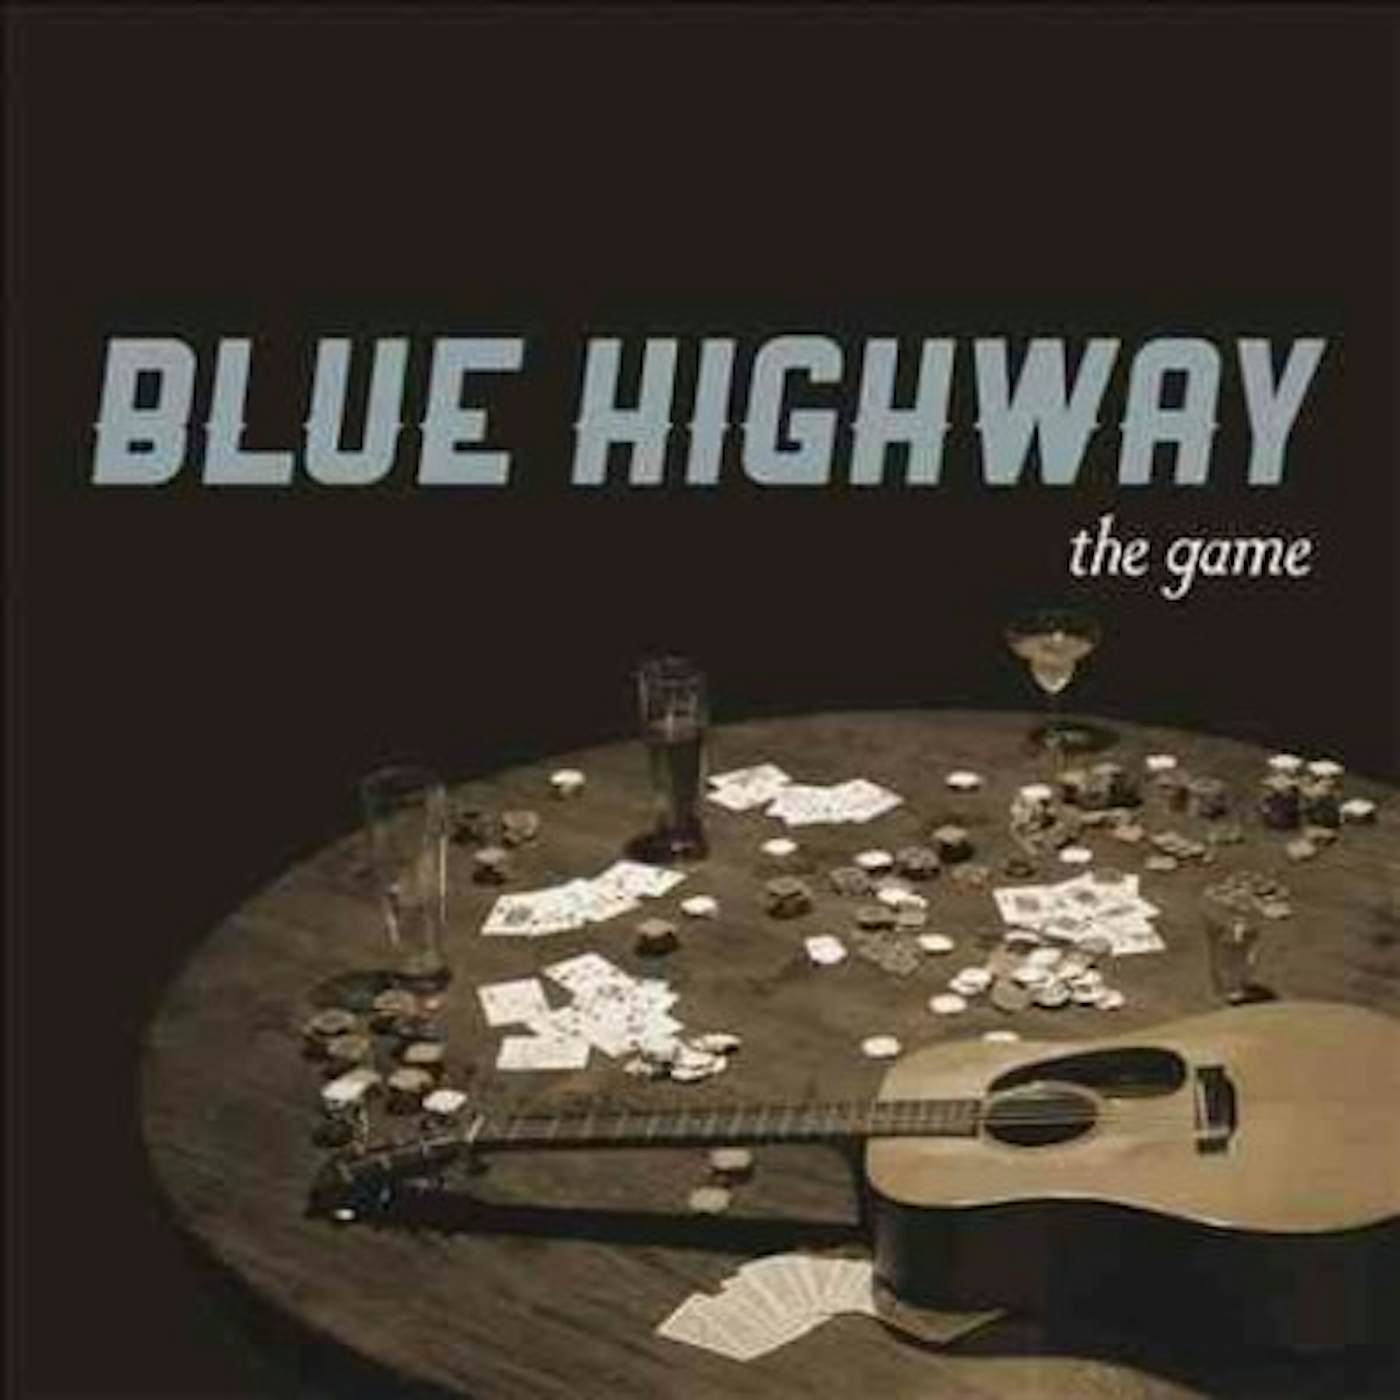 Blue Highway The Game CD